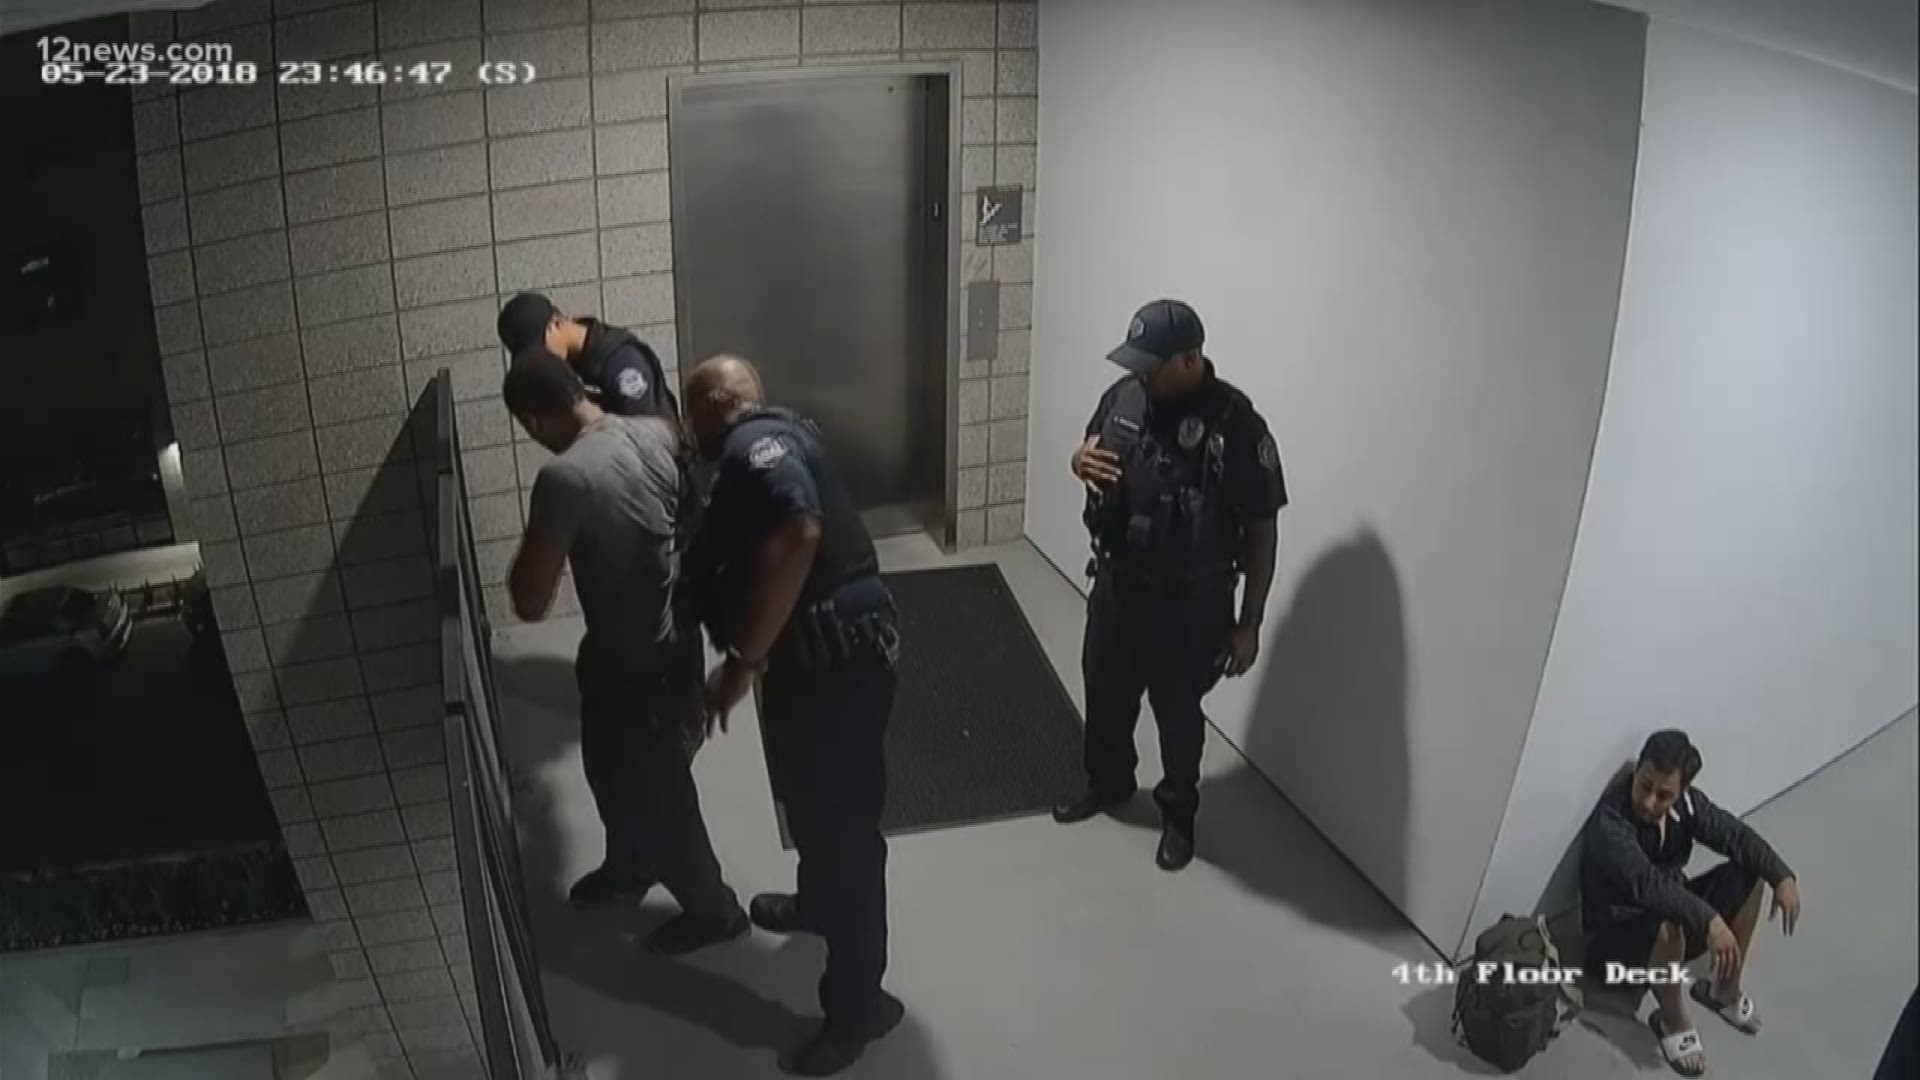 Months after video showing Mesa police punch a suspect unconscious the man is threatening to sue the police department for $2 million for mental and physical damages. The man's lawyer has filed a notice of claim, letting the city know an impending lawsuit is coming if the city doesn't settle.